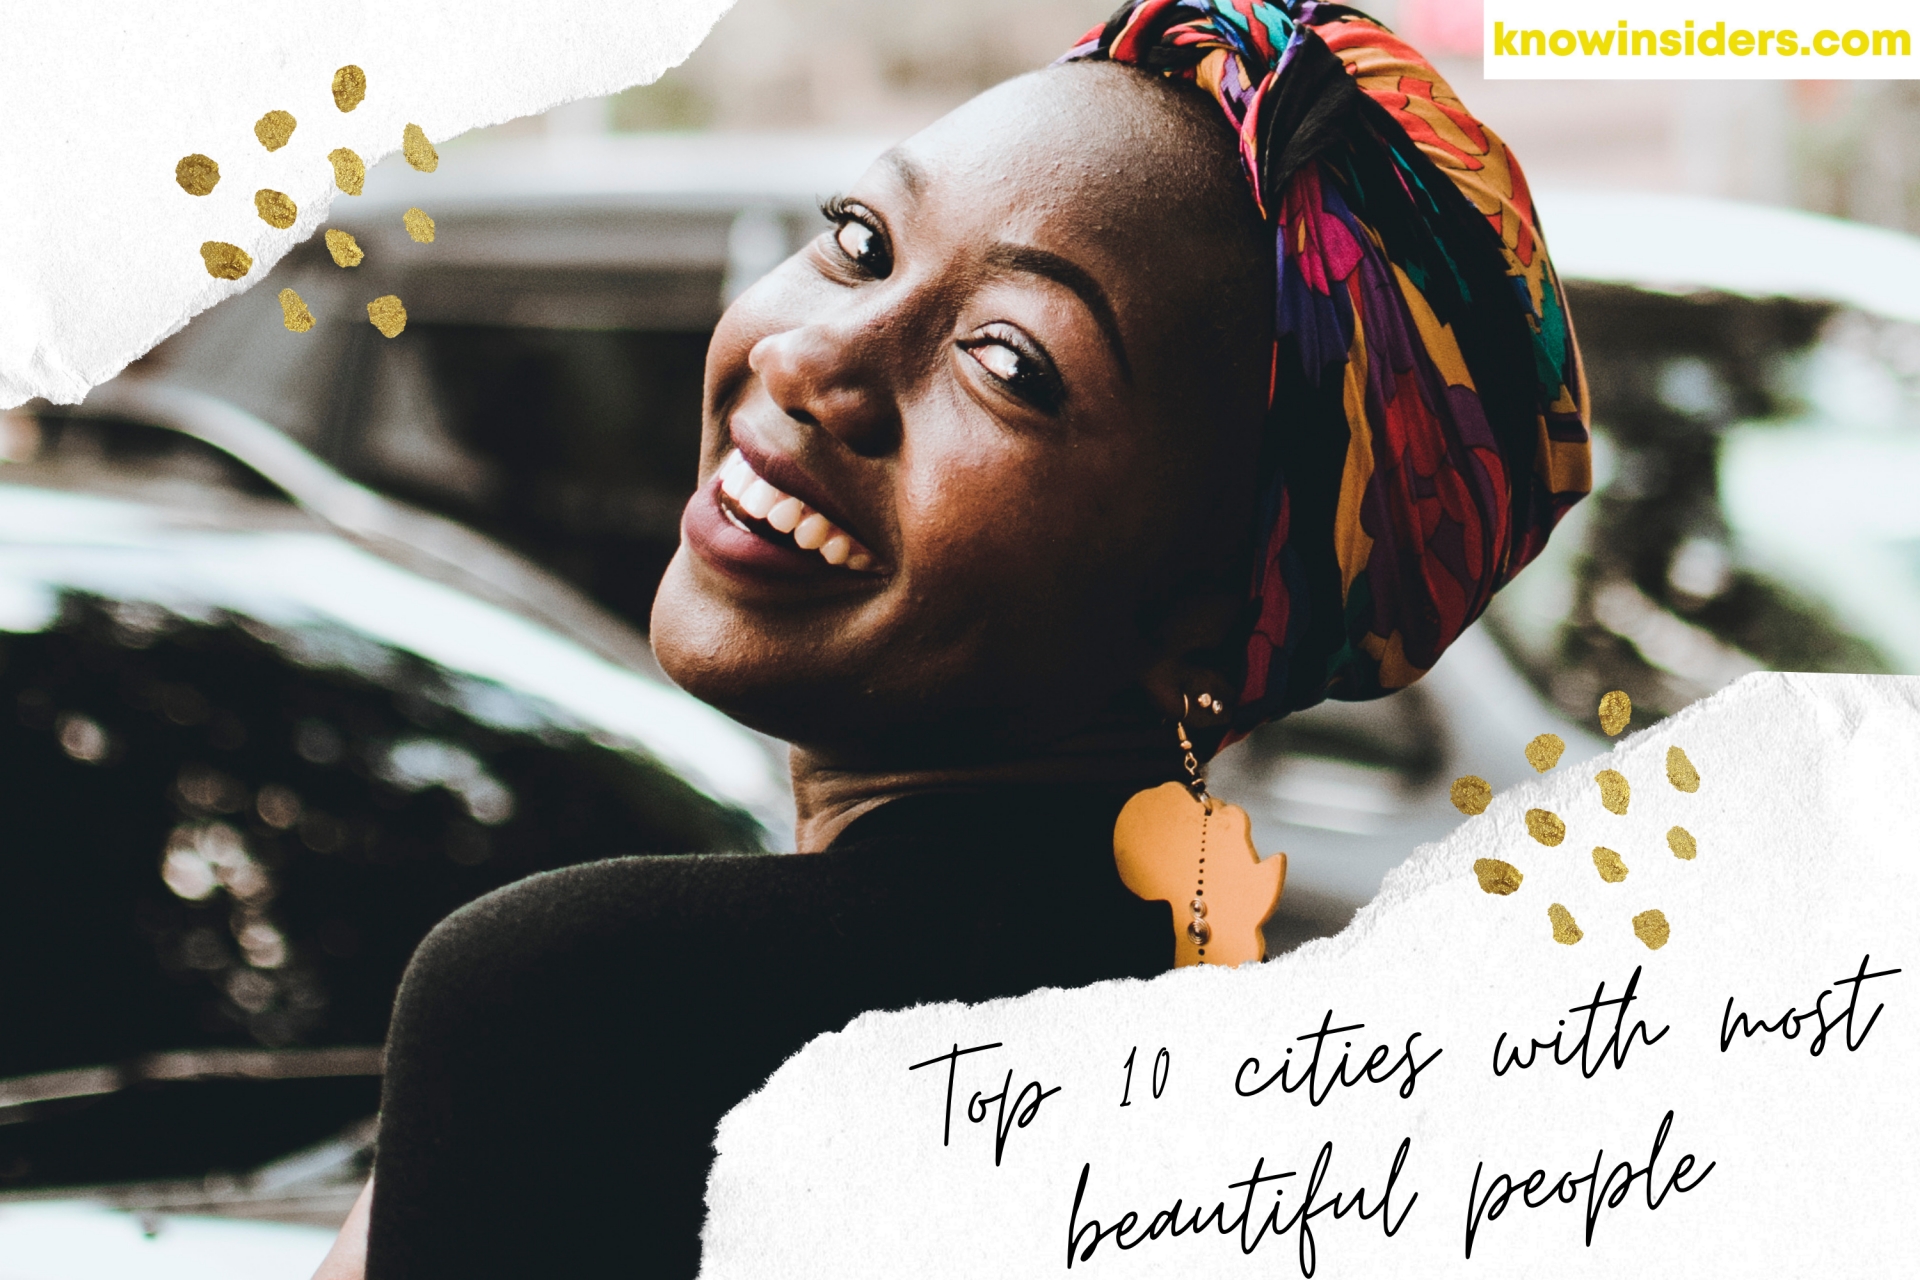 Top 10 Cities With The Most Beautiful People In The World